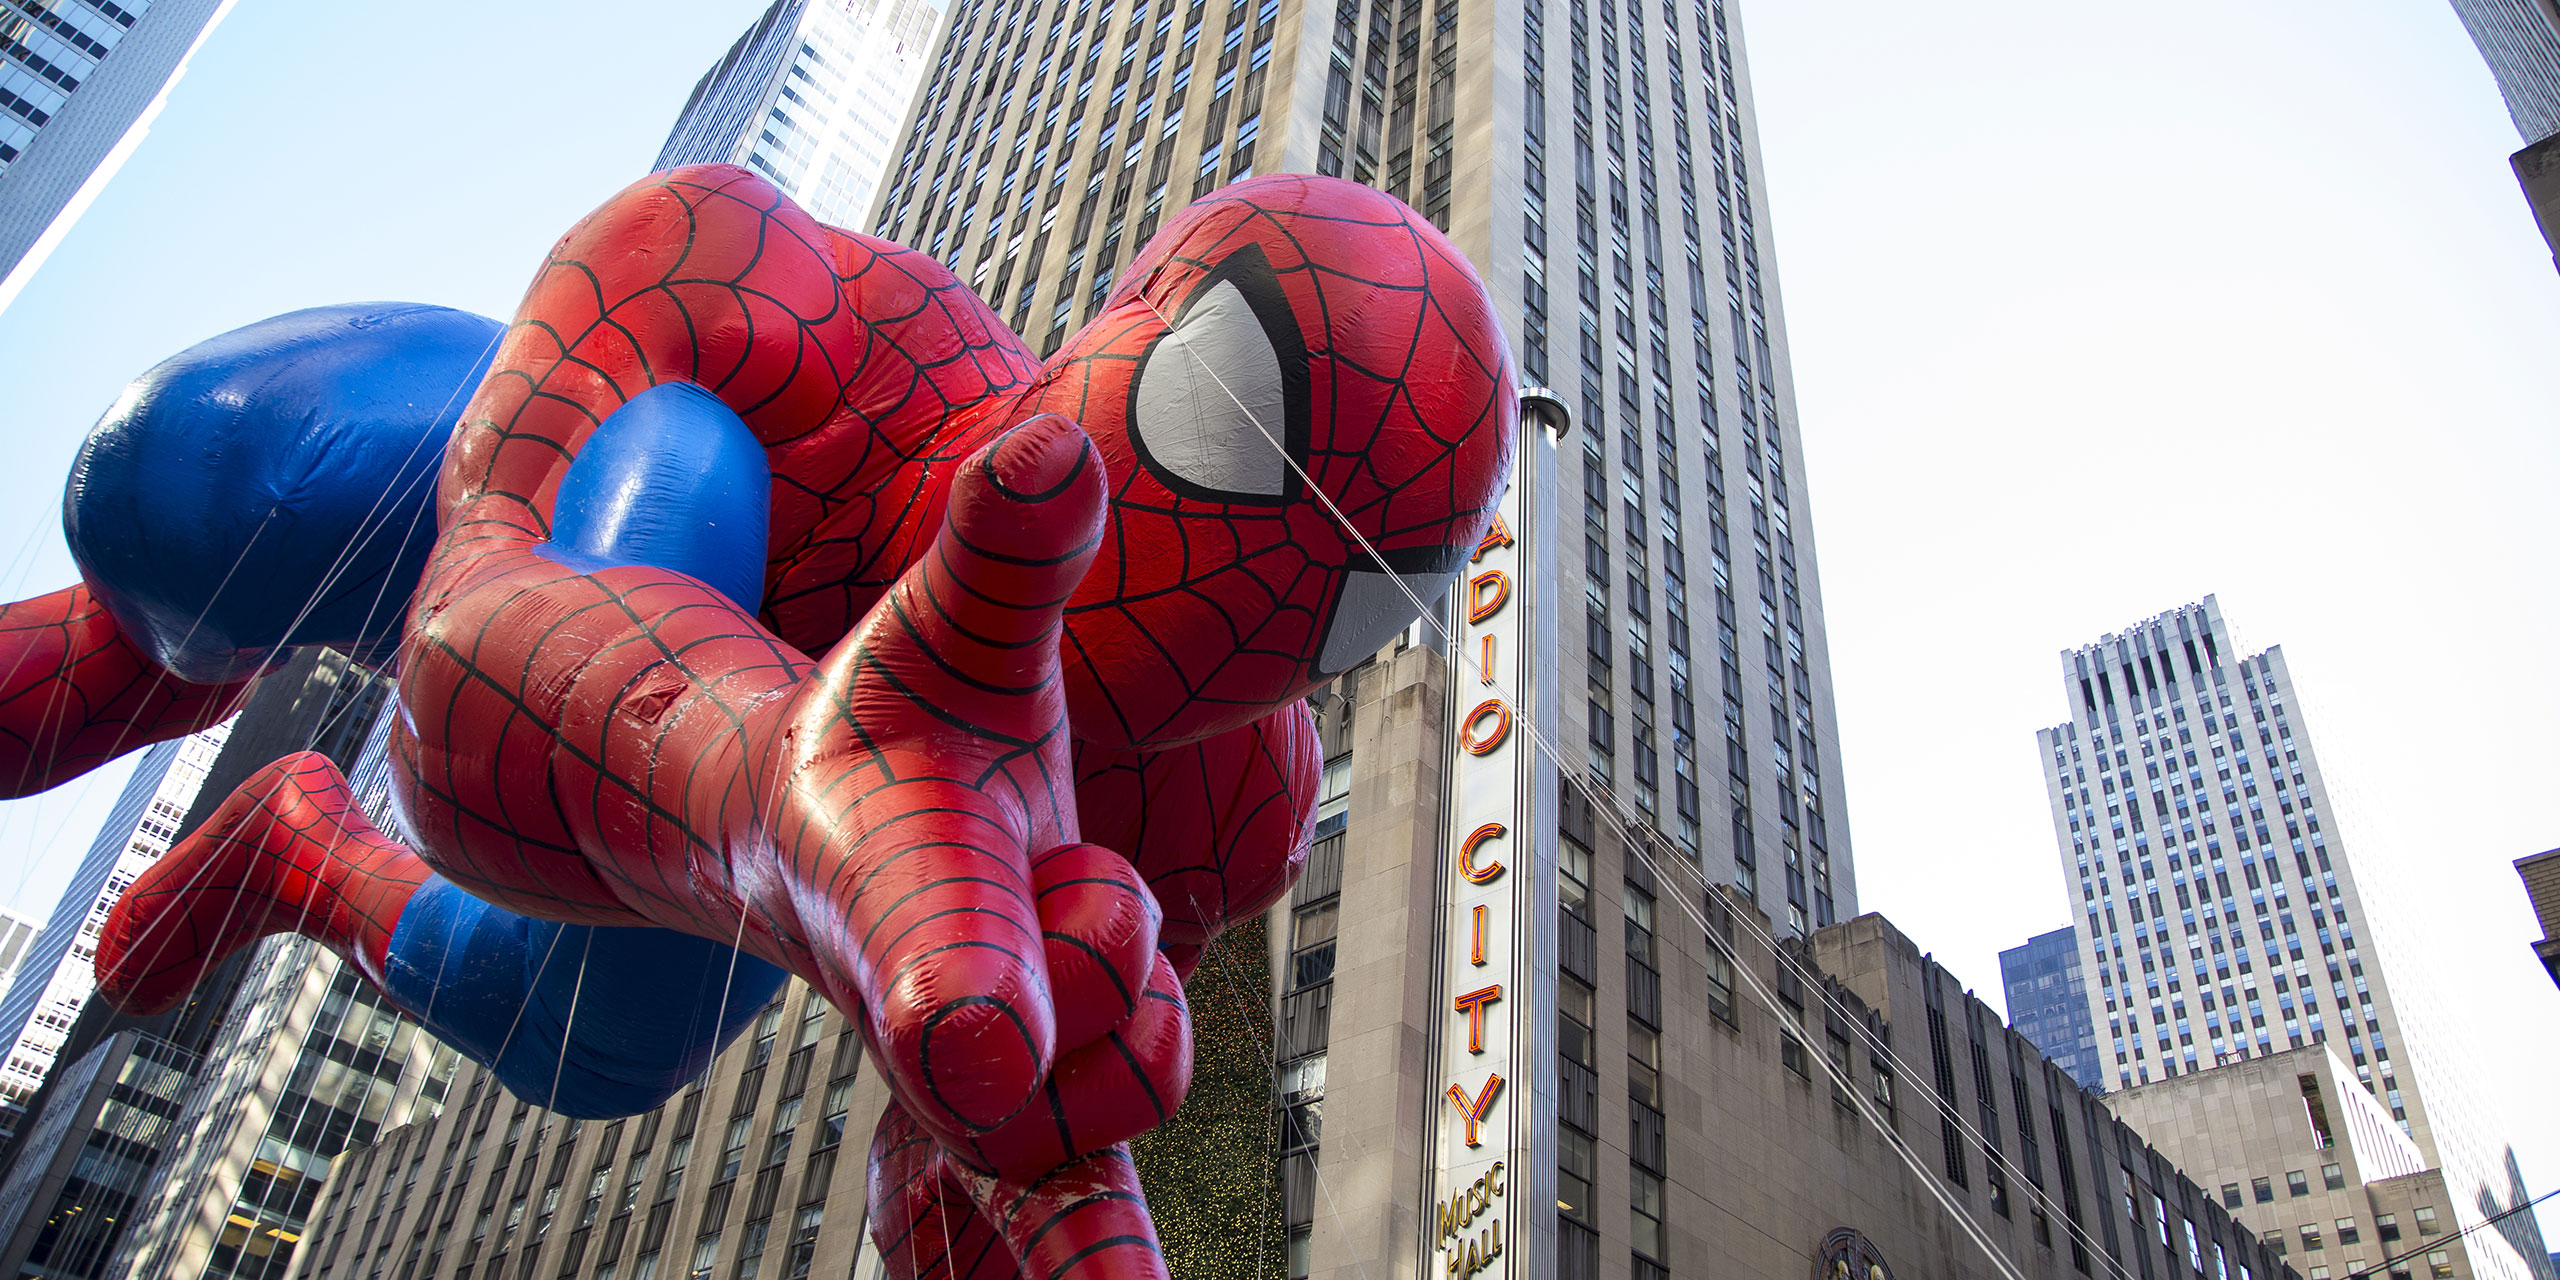 Spiderman at the Macy's Thanksgiving Day Parade; Courtesy of a katz/Shutterstock.com